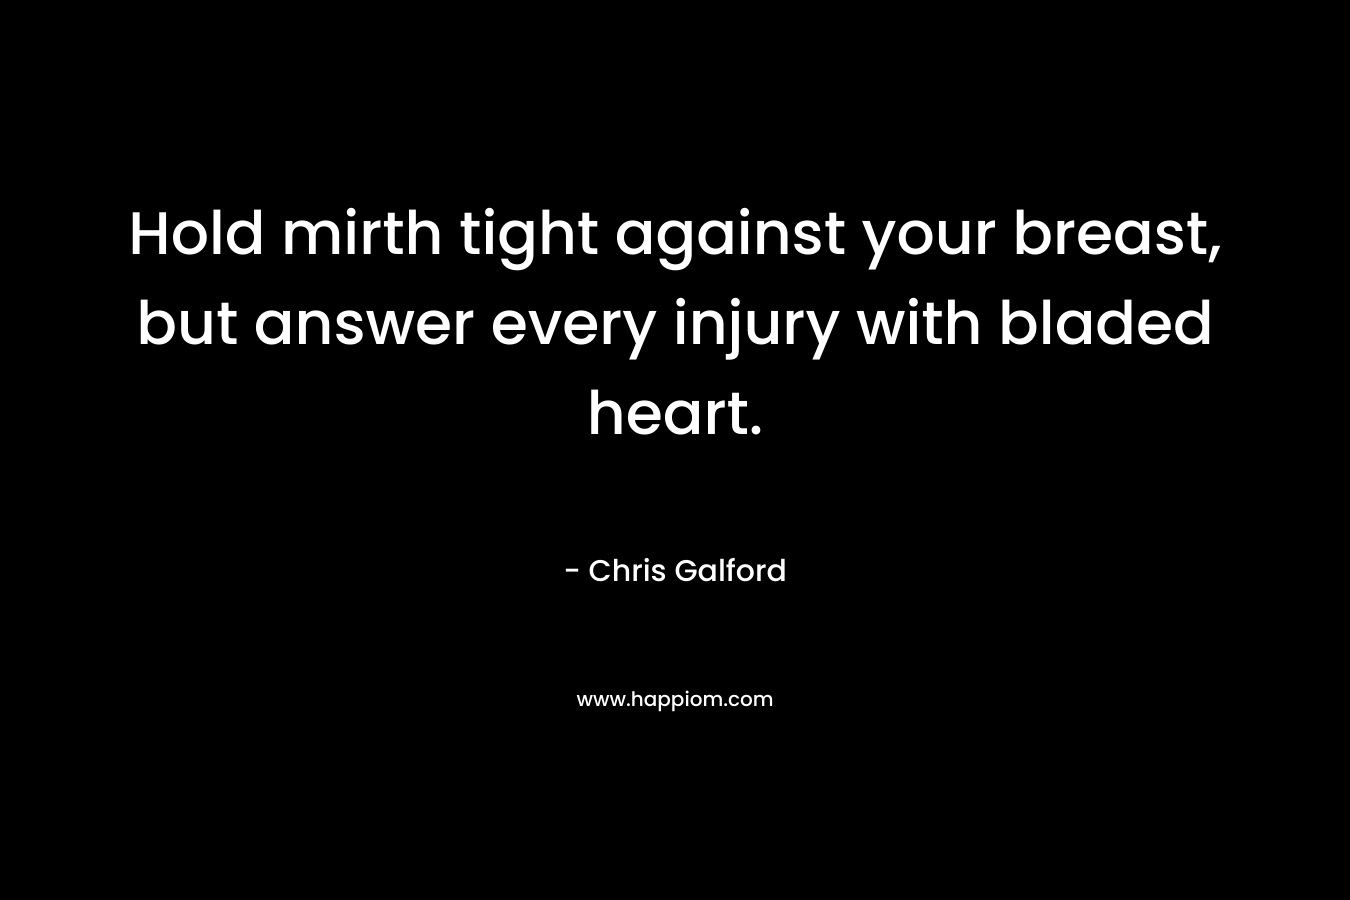 Hold mirth tight against your breast, but answer every injury with bladed heart. – Chris Galford